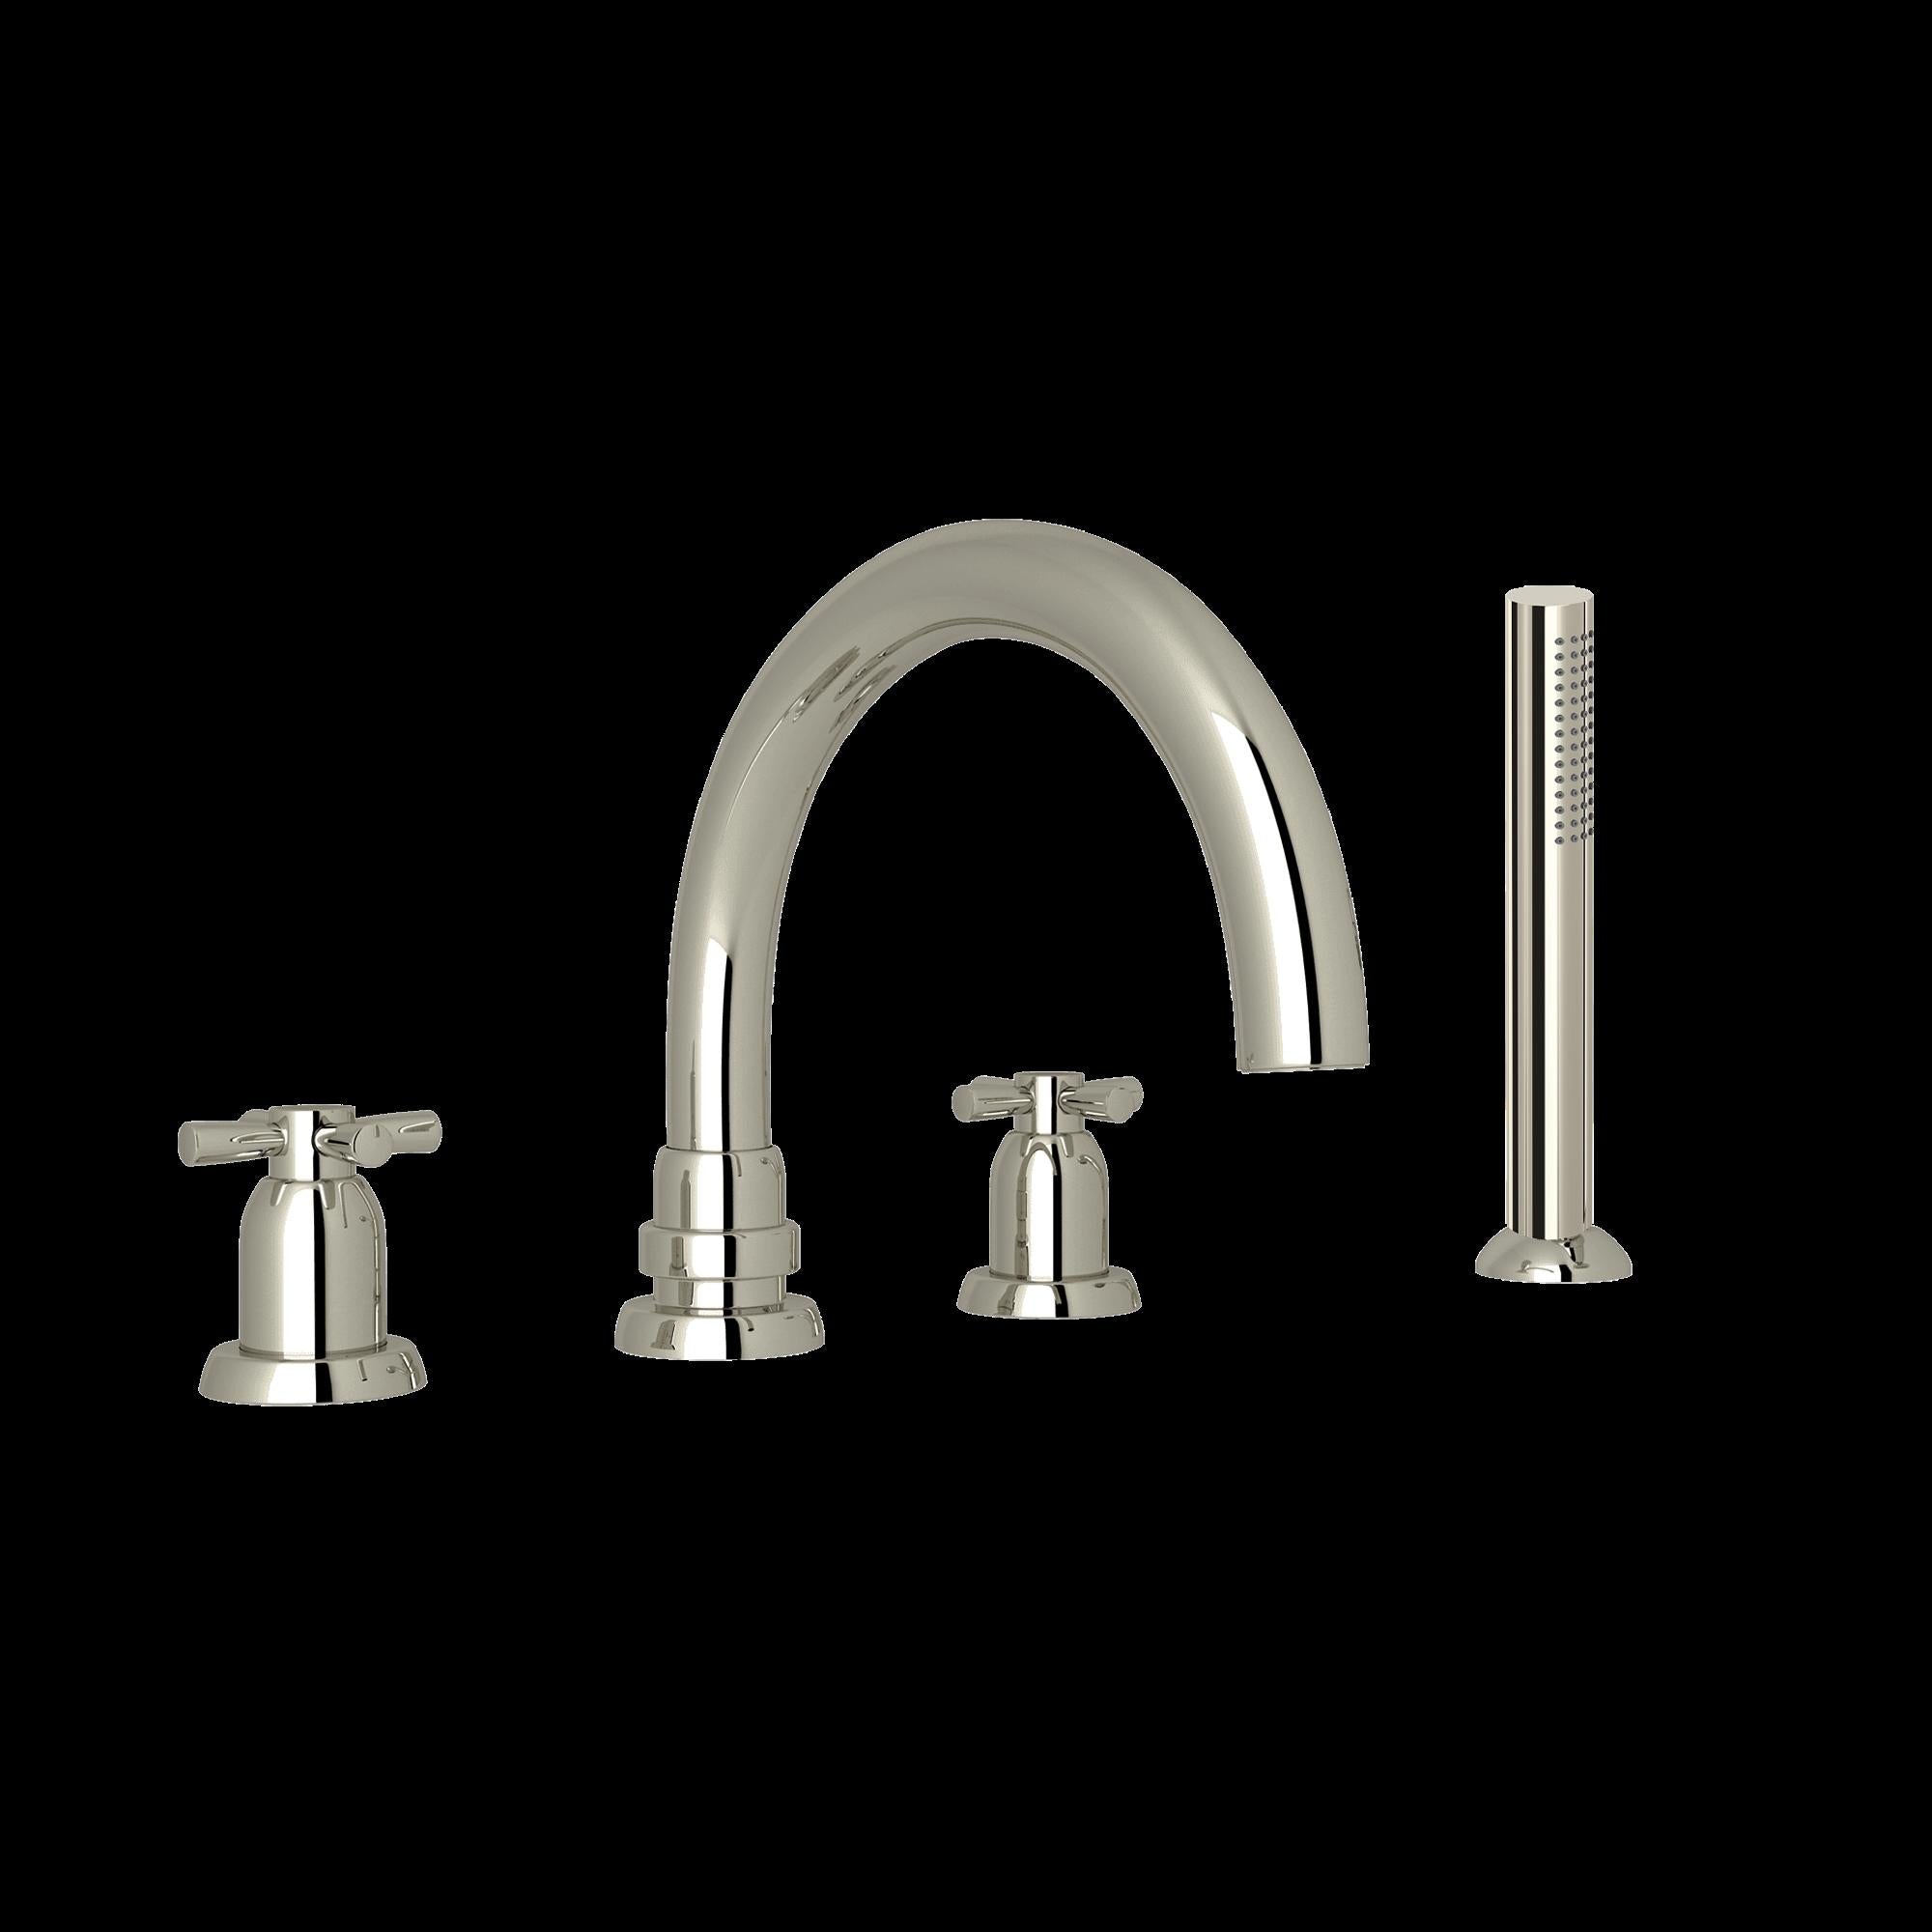 Perrin & Rowe U.3976 Holborn 4-Hole Deck Mount Tub Filler with C-Spout